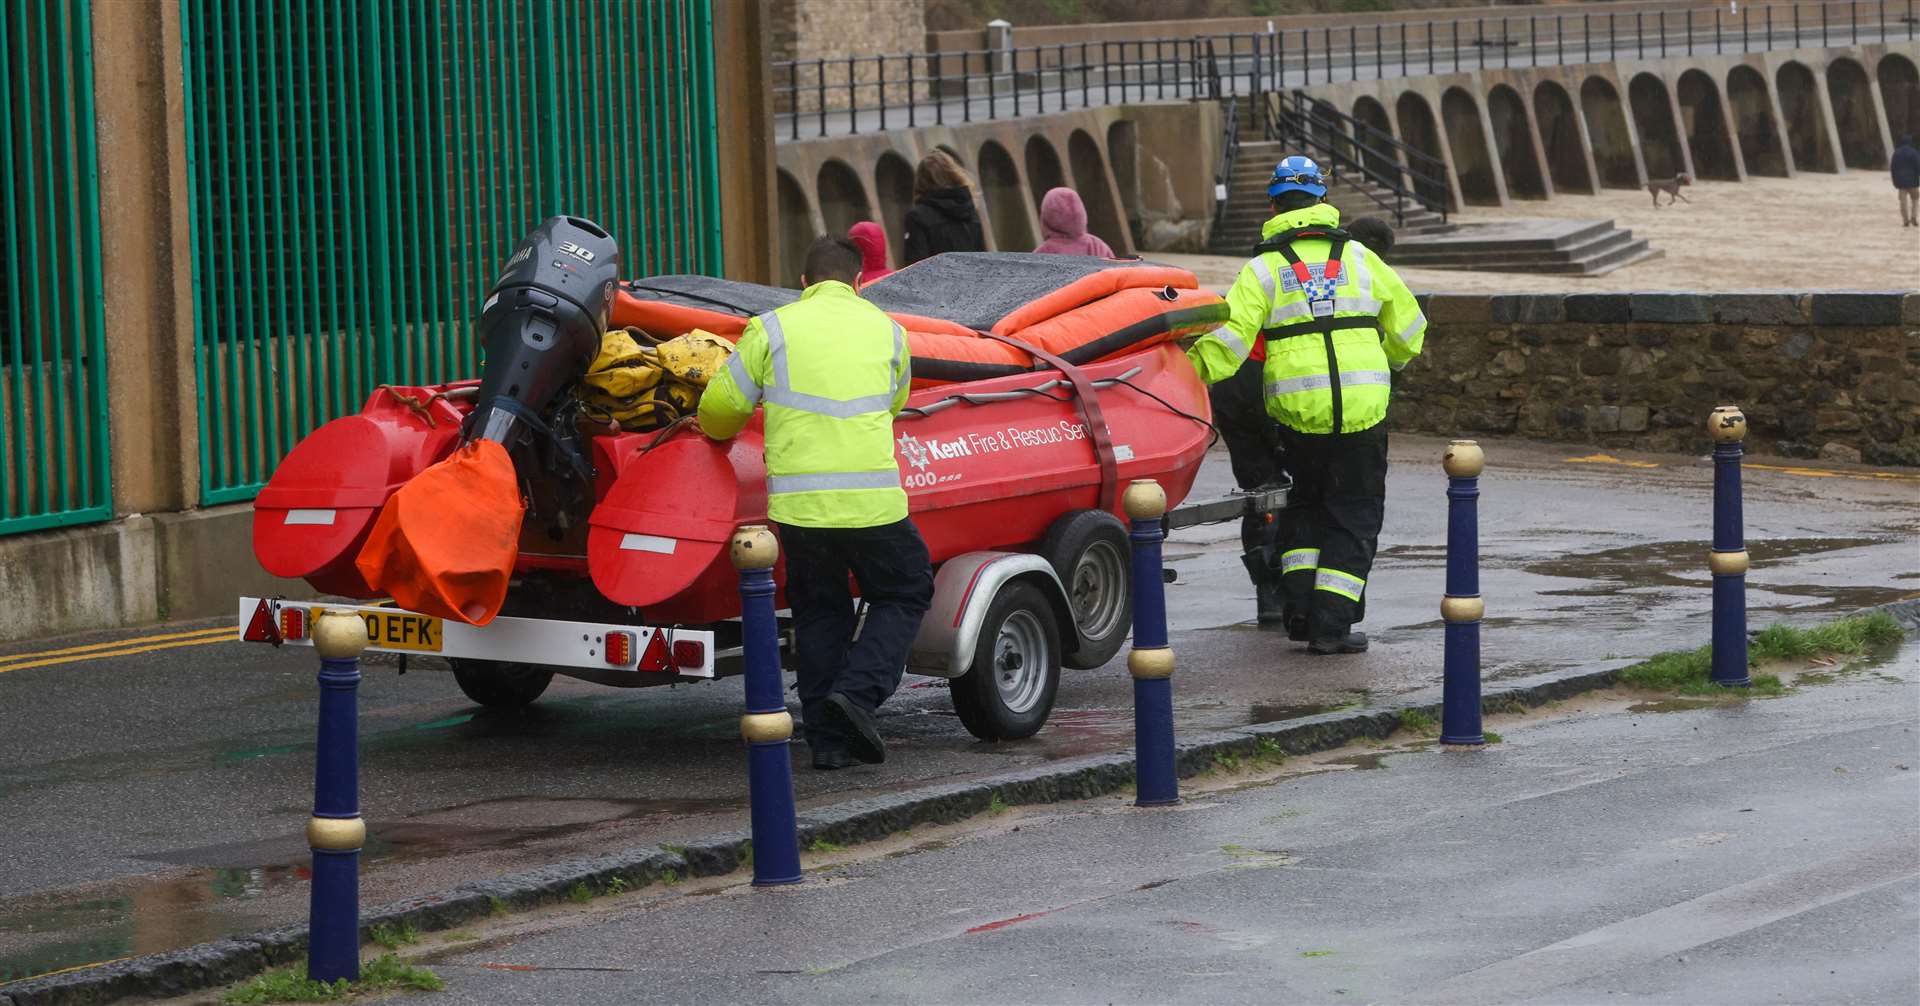 The coastguard and fire service helped in the rescue. Photo: UKNiP